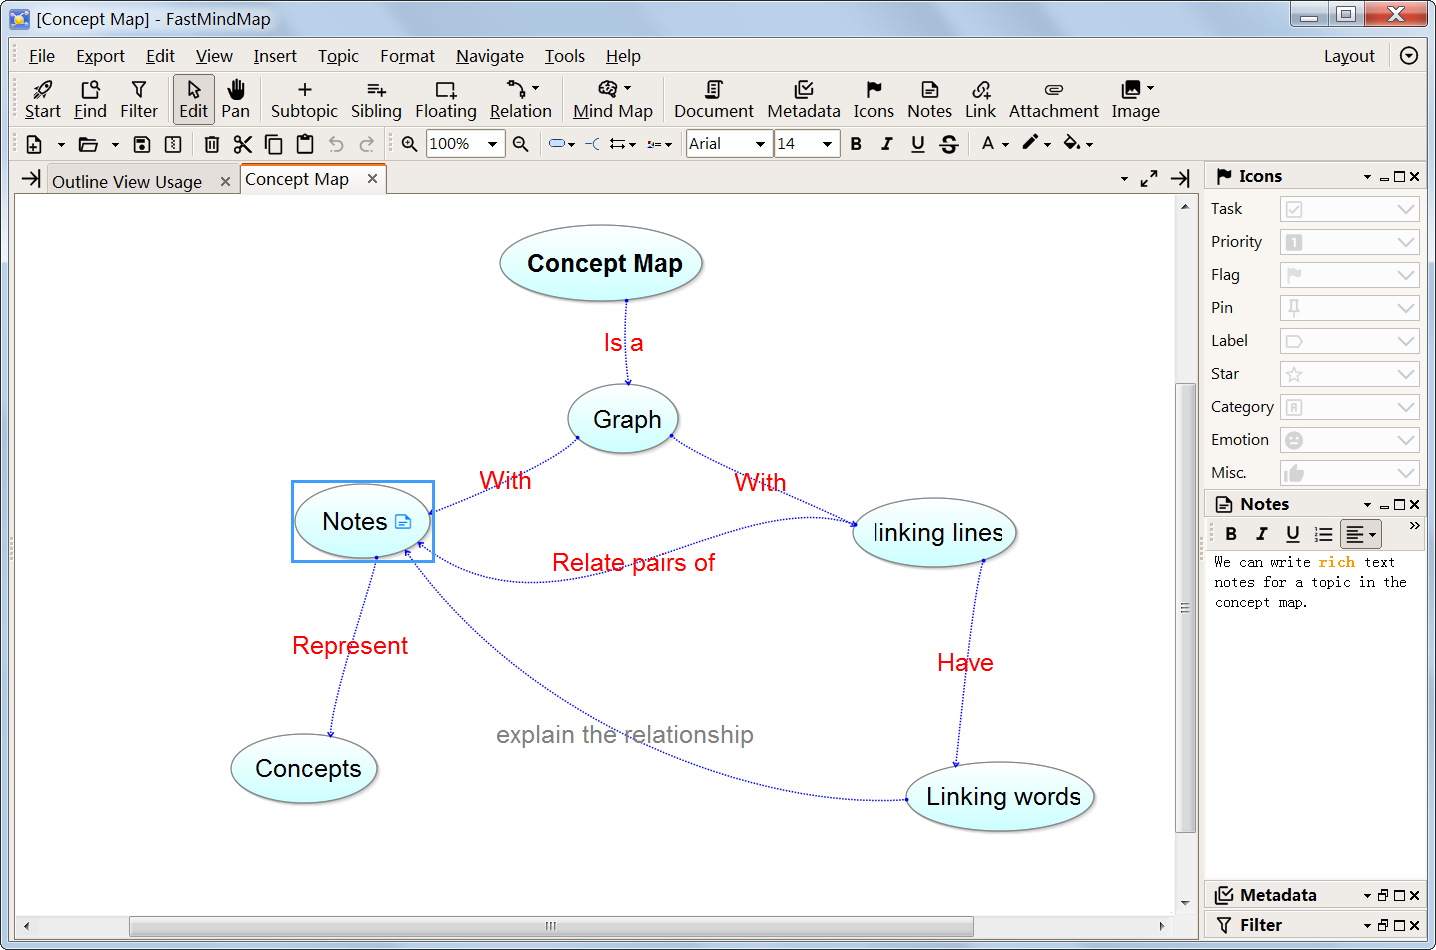 Making concept maps is easy with FastMindMap